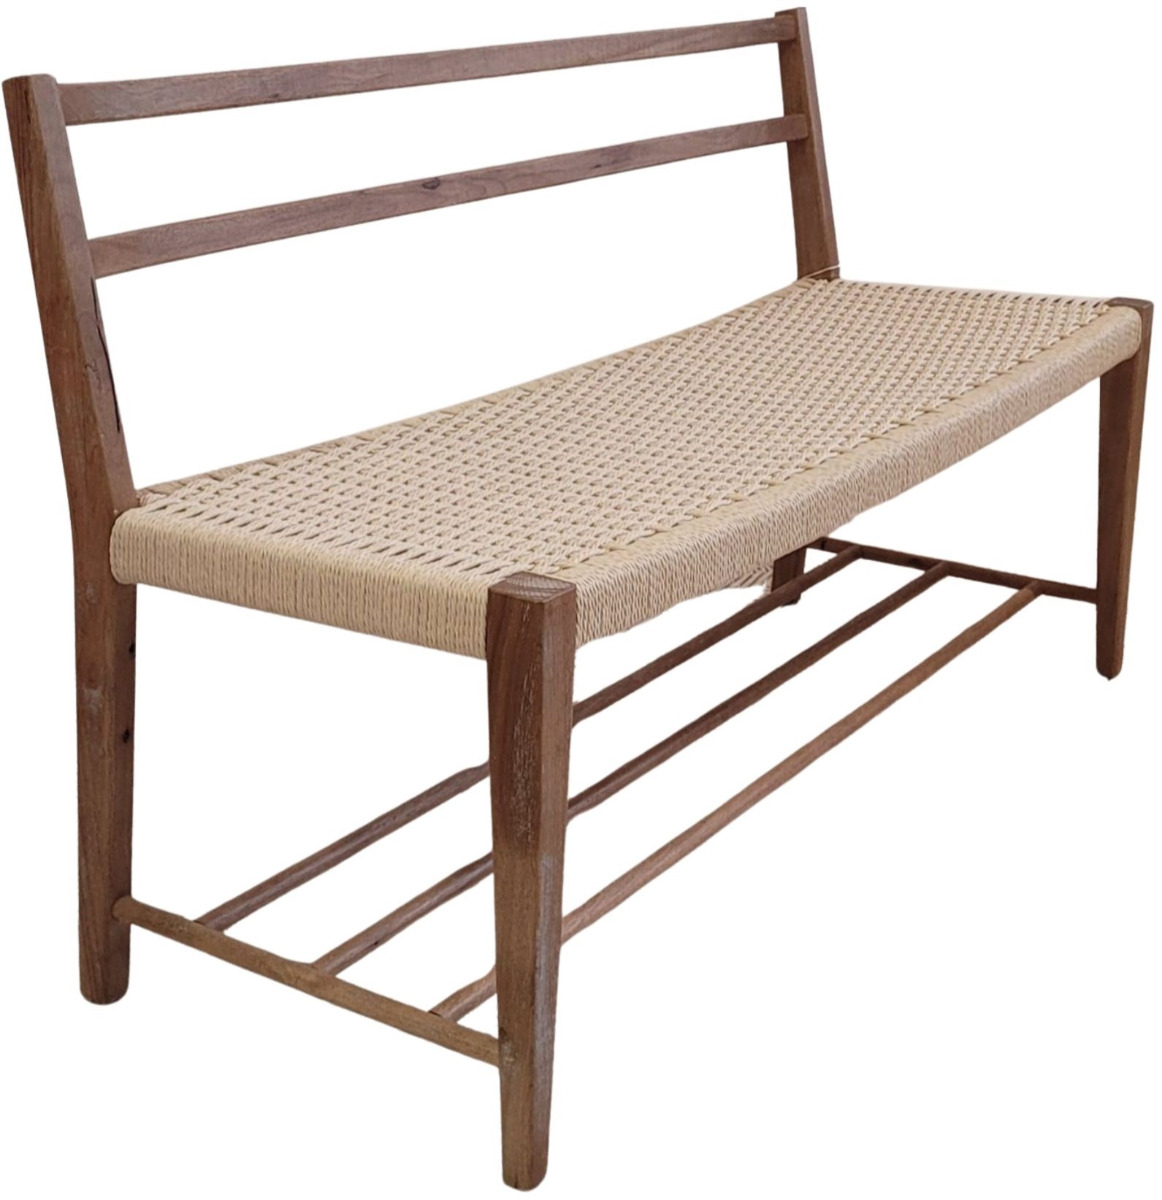 Limoges Bench with wicker seat & backrest